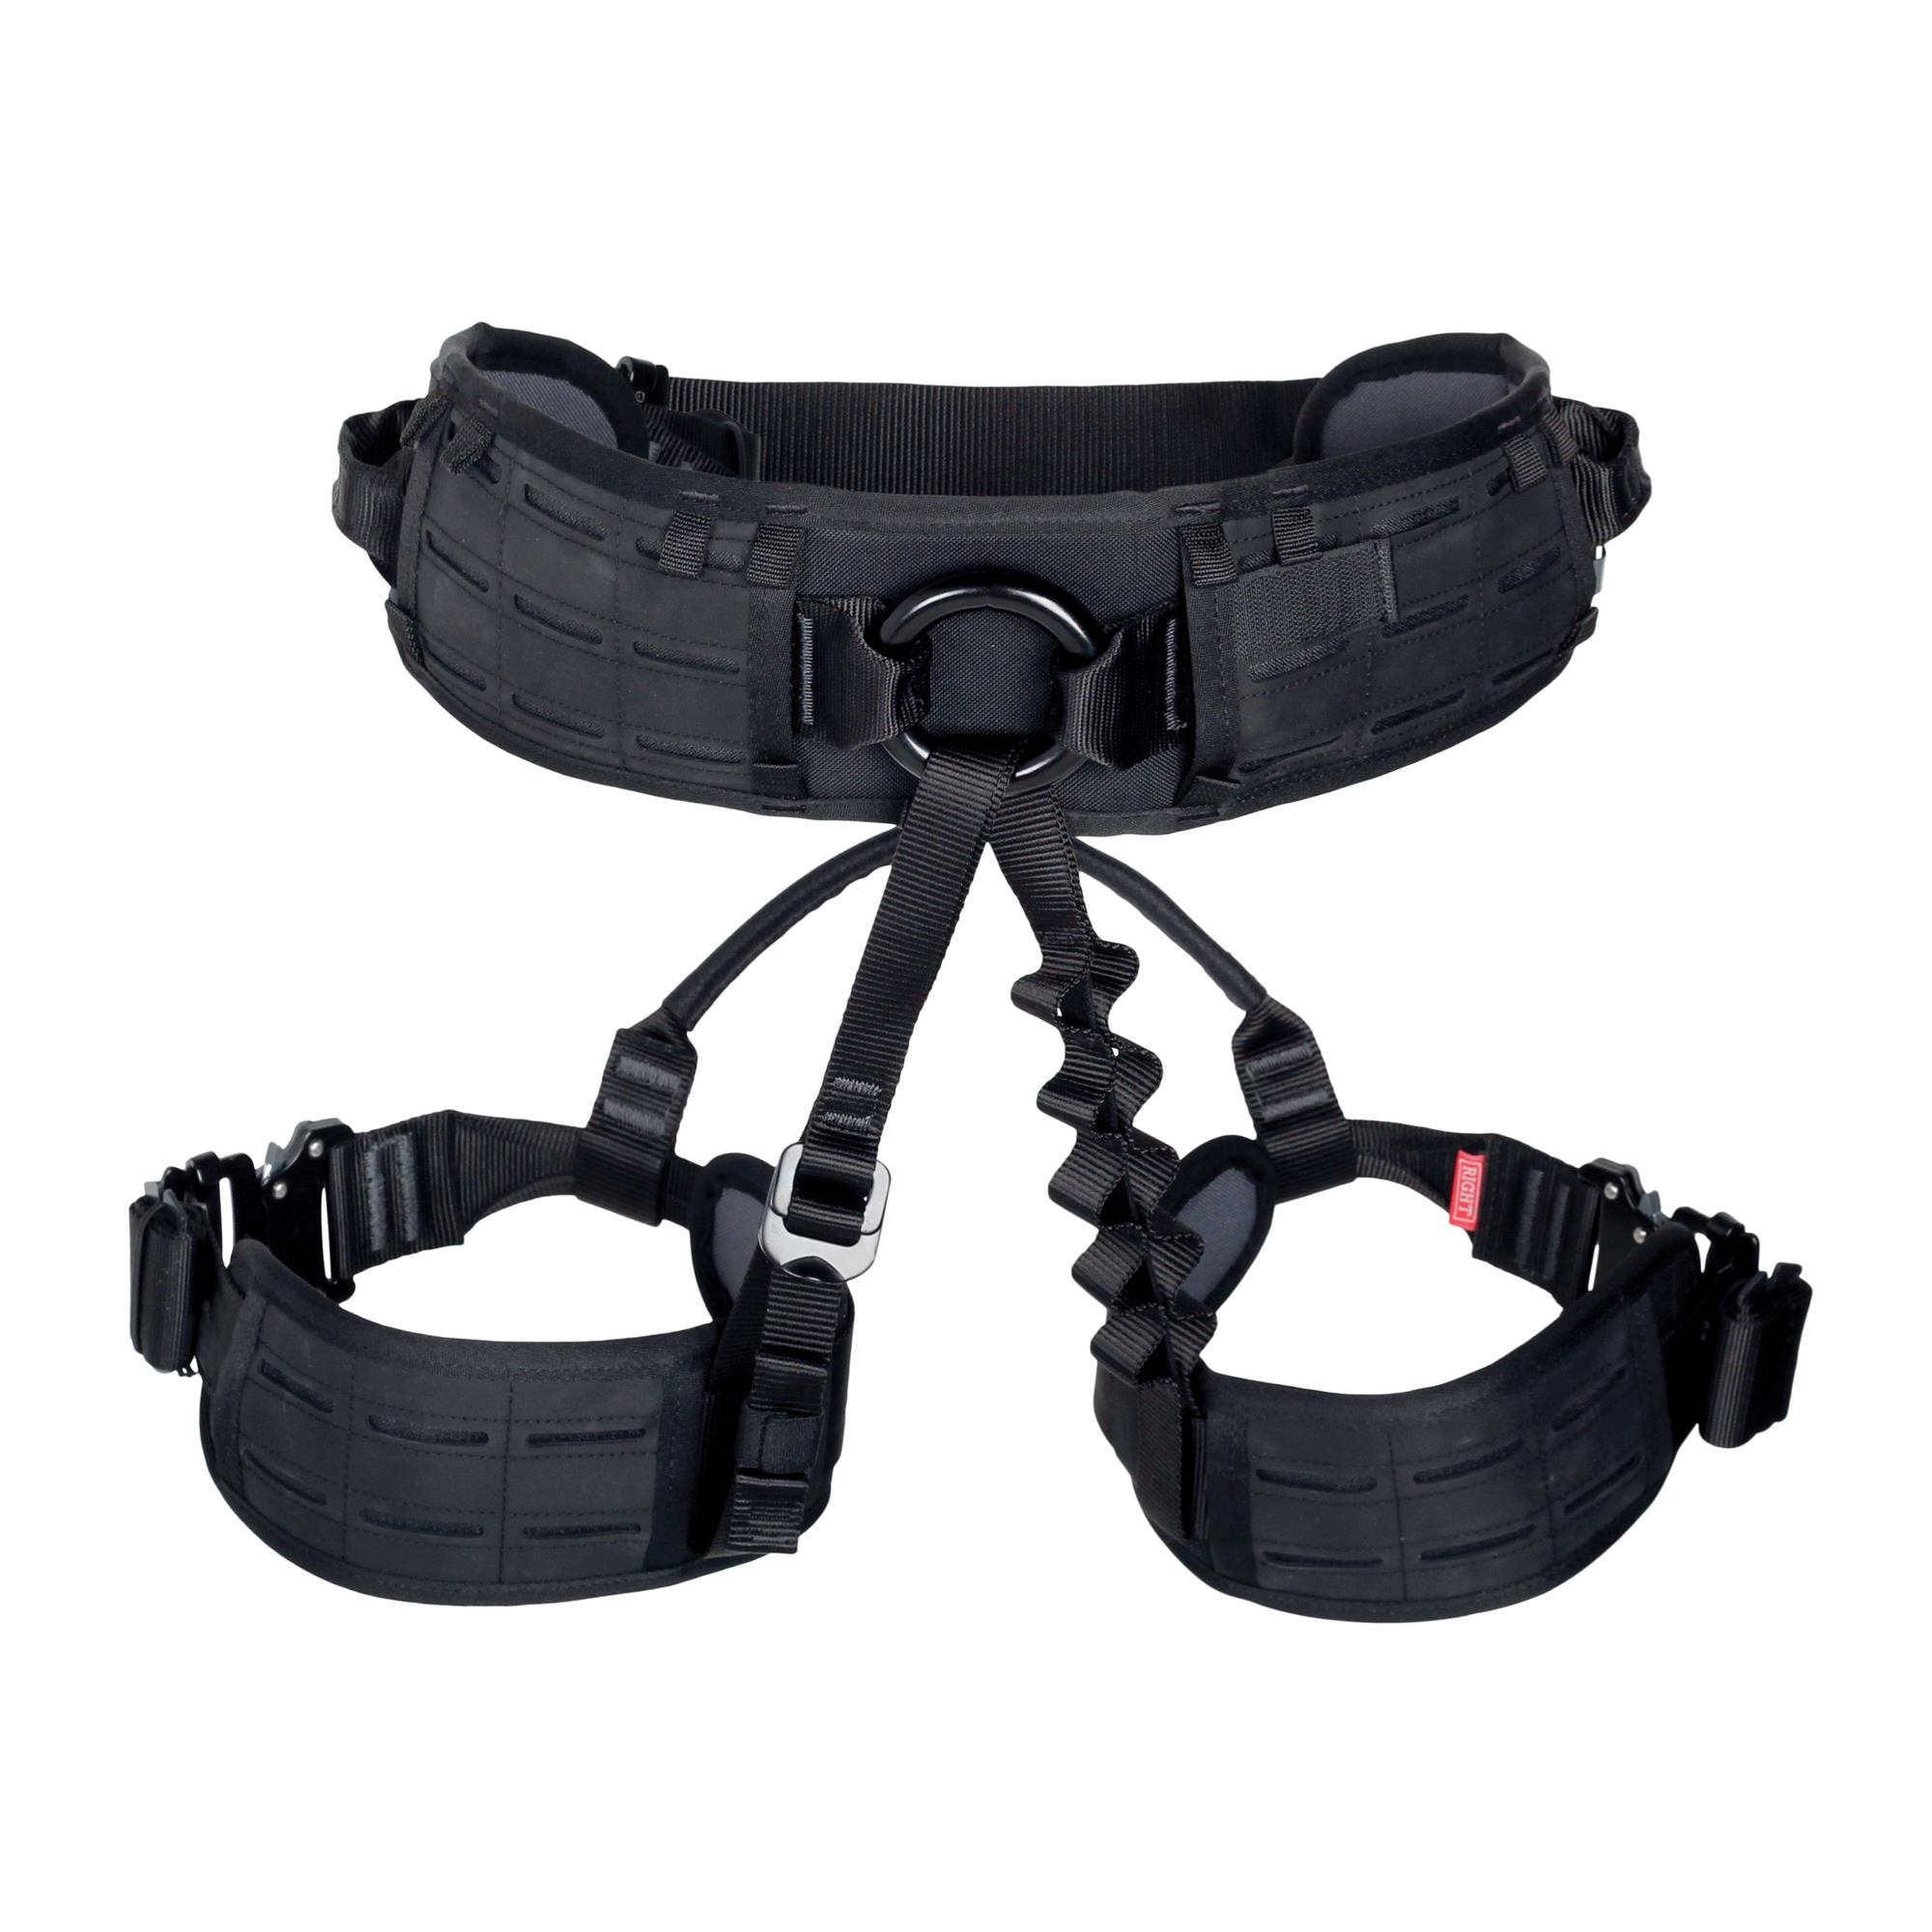 Leg Loops of Singing Rock Tactic Master Safety Harness